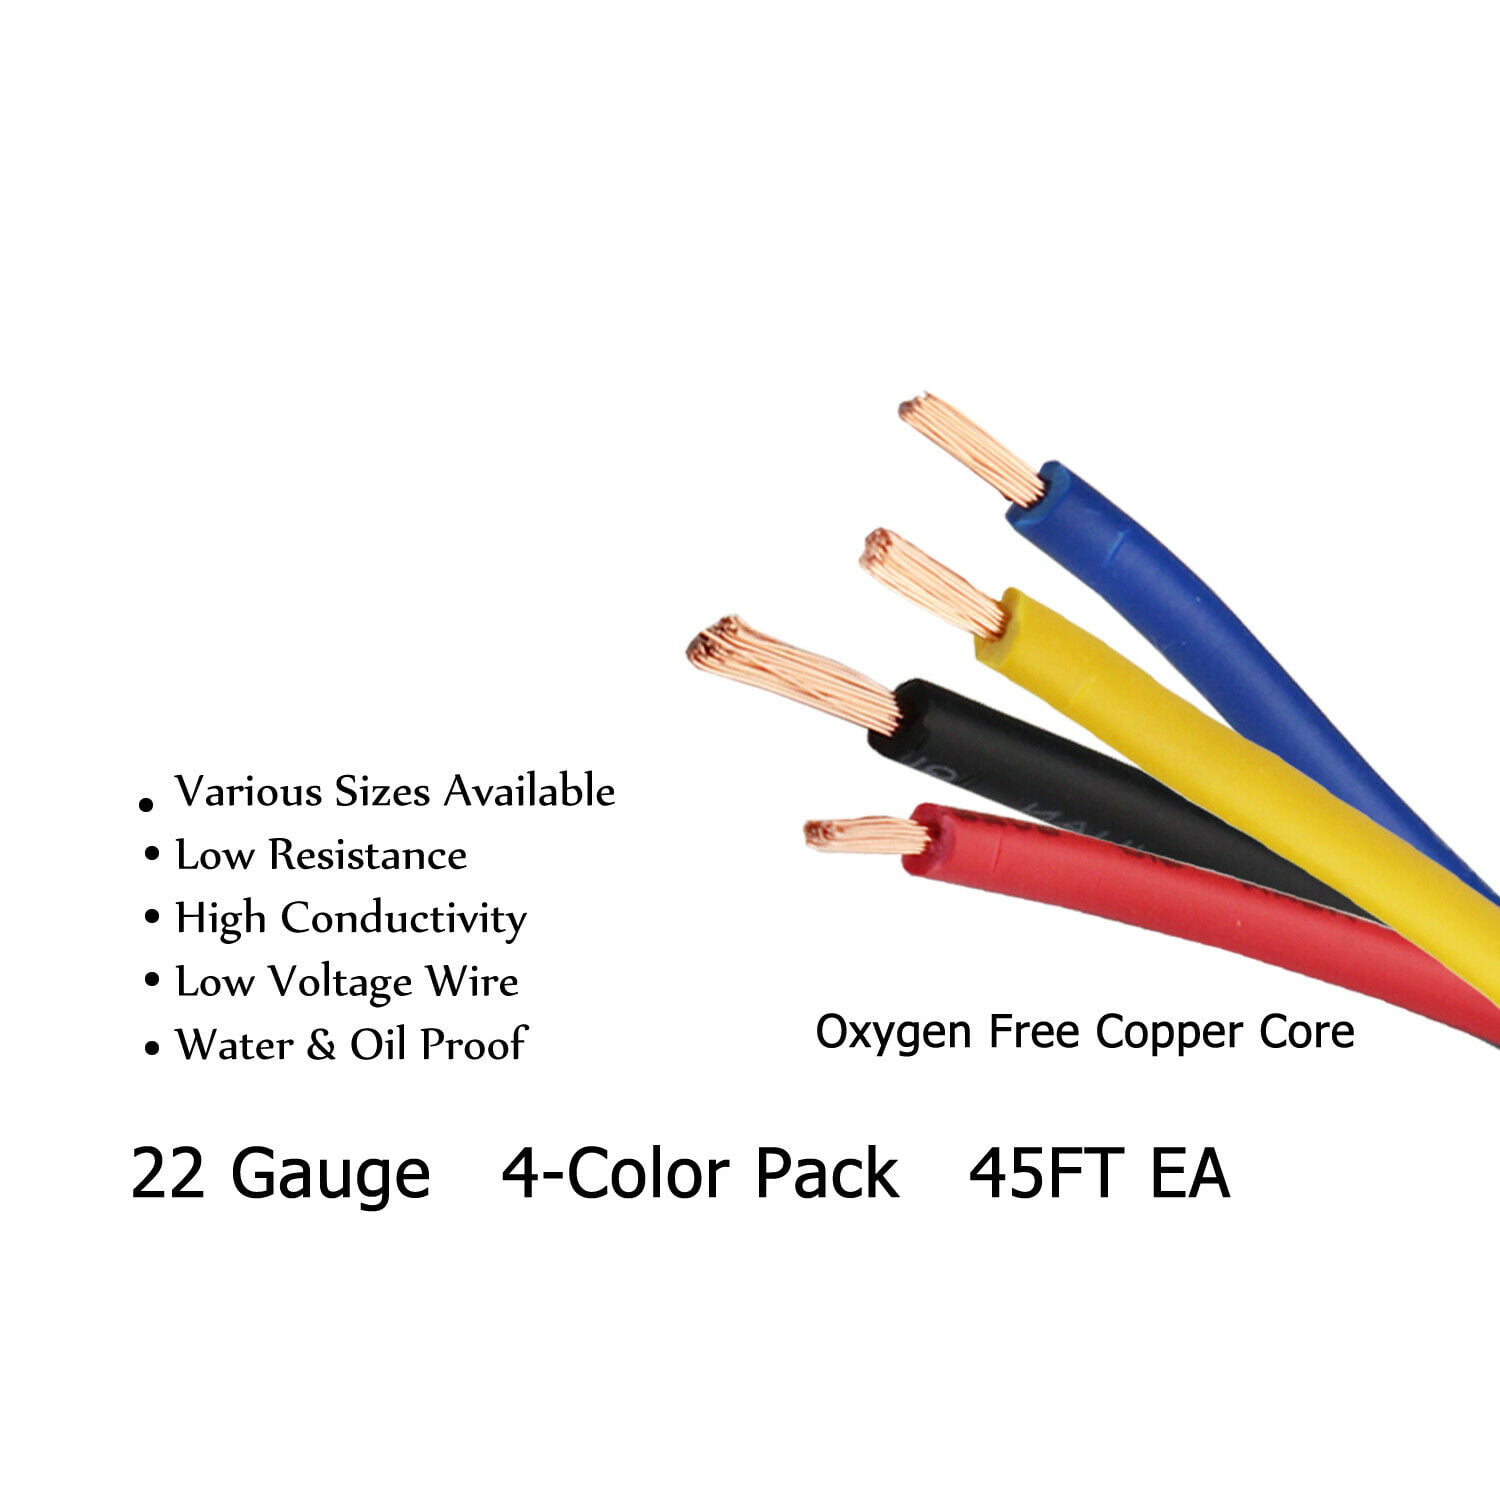 6 COLORS BY 25 EACH AWG Order by 3pm EST Shipped Same Day Motorcycle TXL General Purpose GAUGE Truck RV 16 GA Automotive Copper Wire 6 Colors 10 Each 